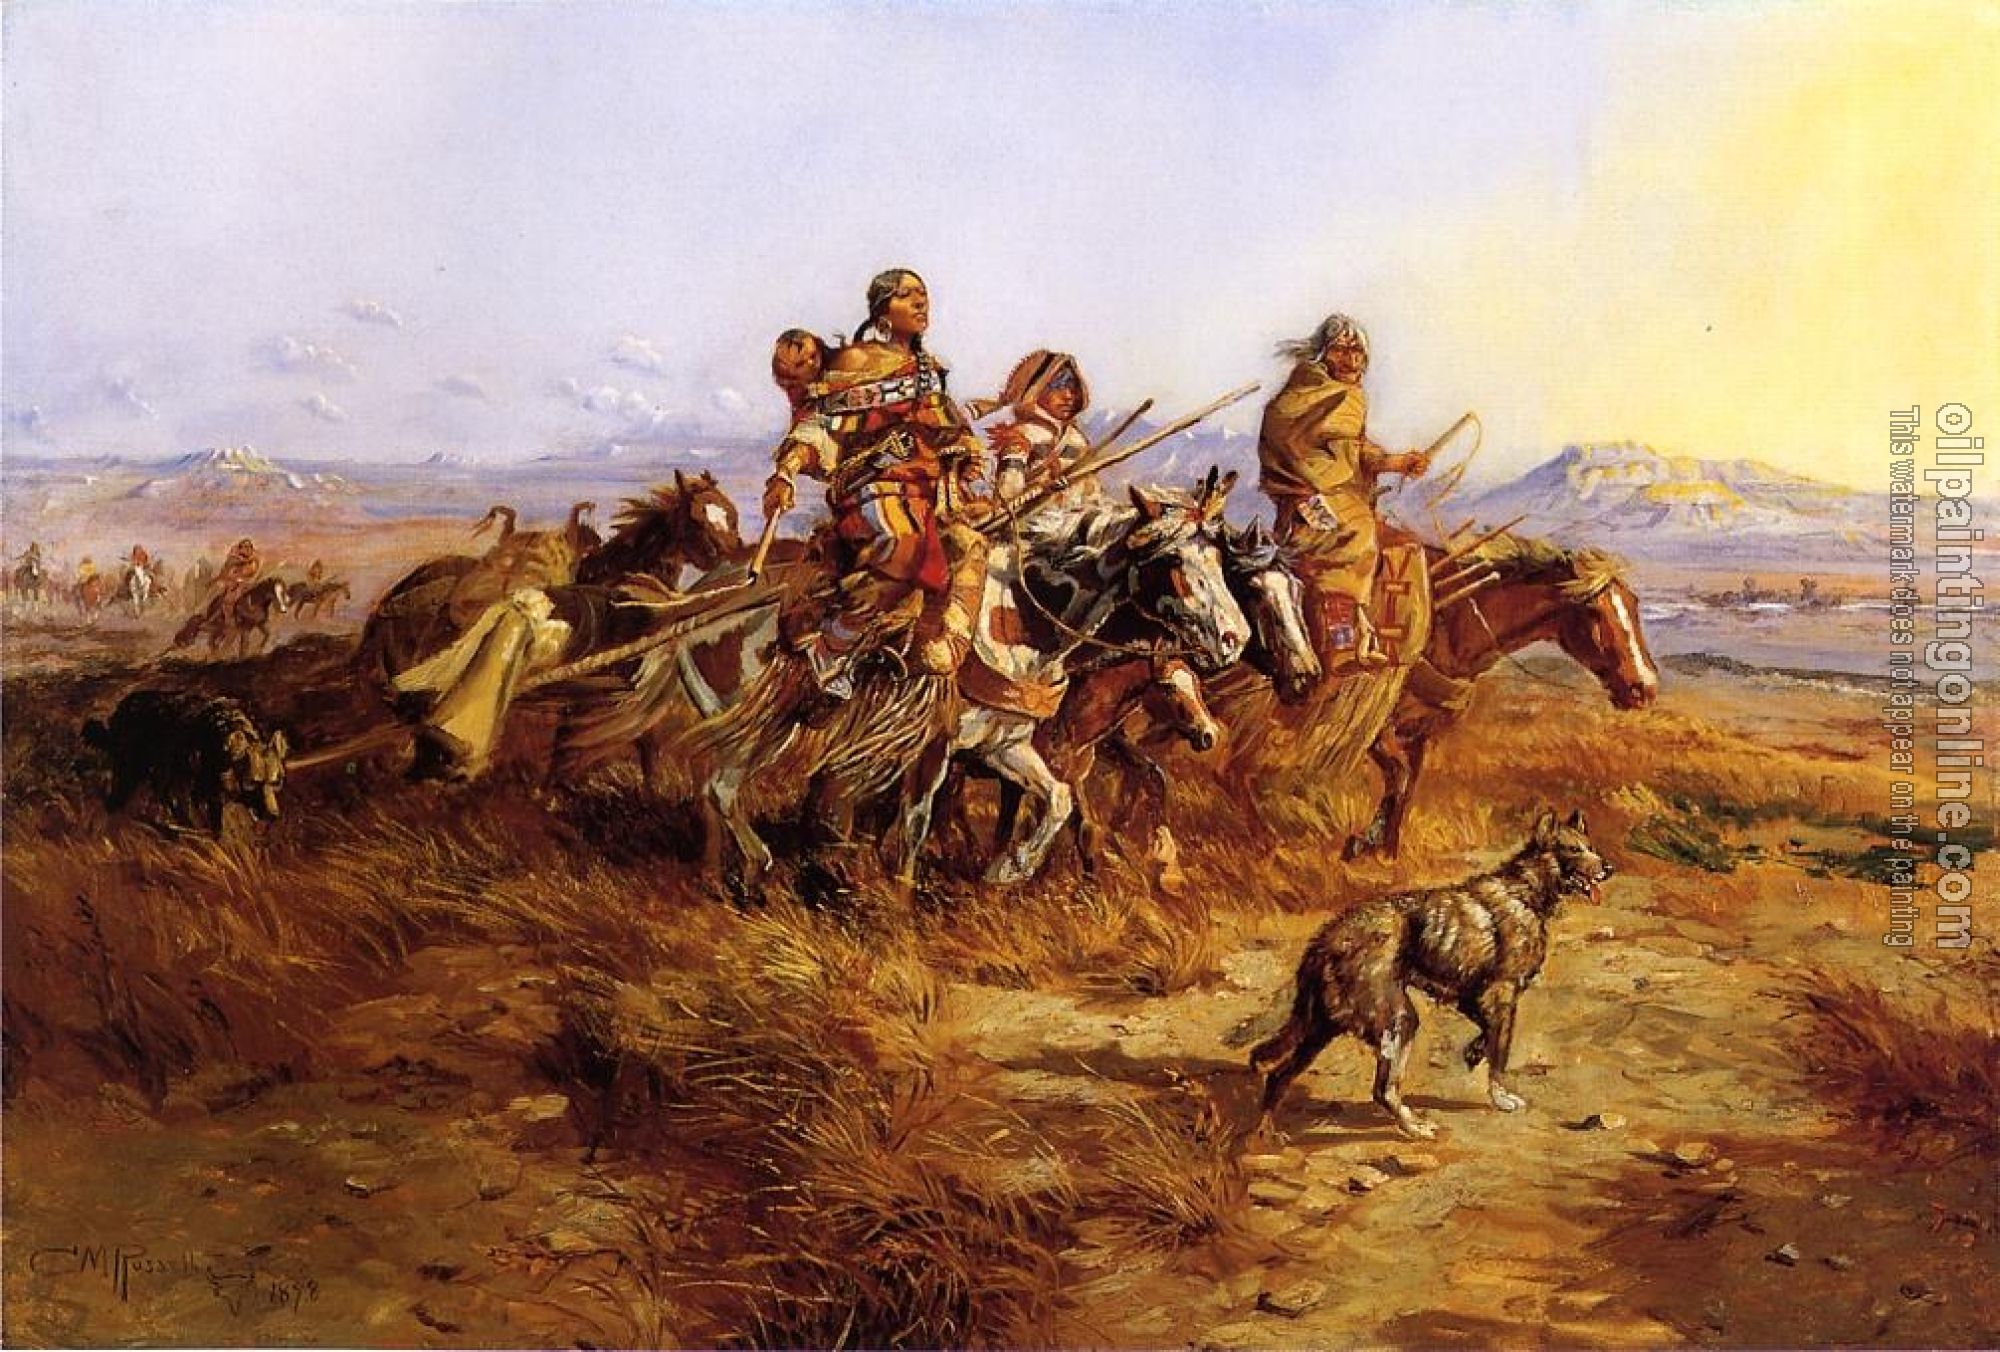 Charles Marion Russell - Indian Women Moving